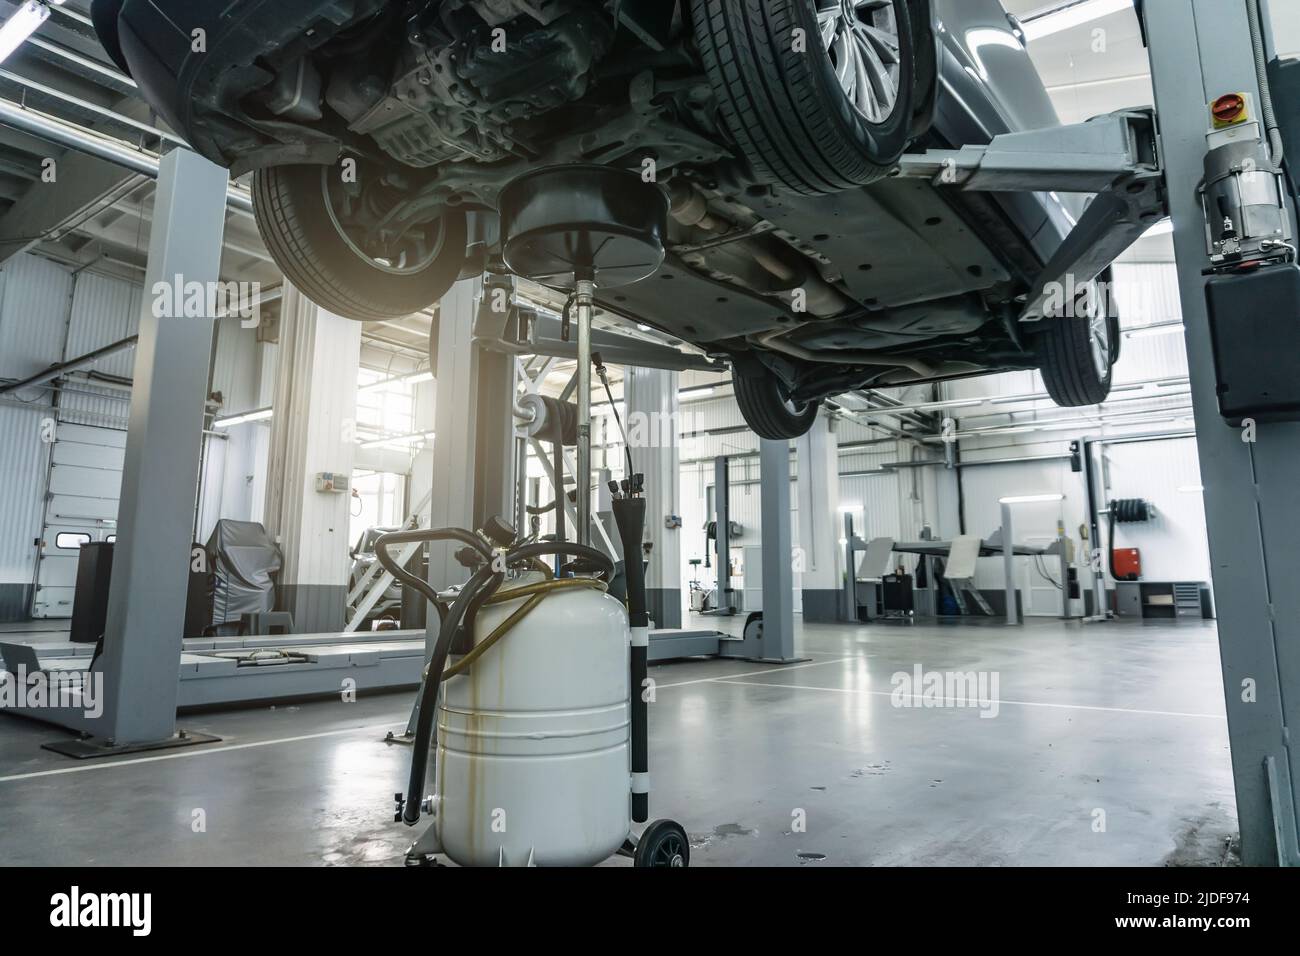 Engine oil change in car service. Auto is on hydraulic lift in garage workshop, process of draining old dark used oil. Stock Photo